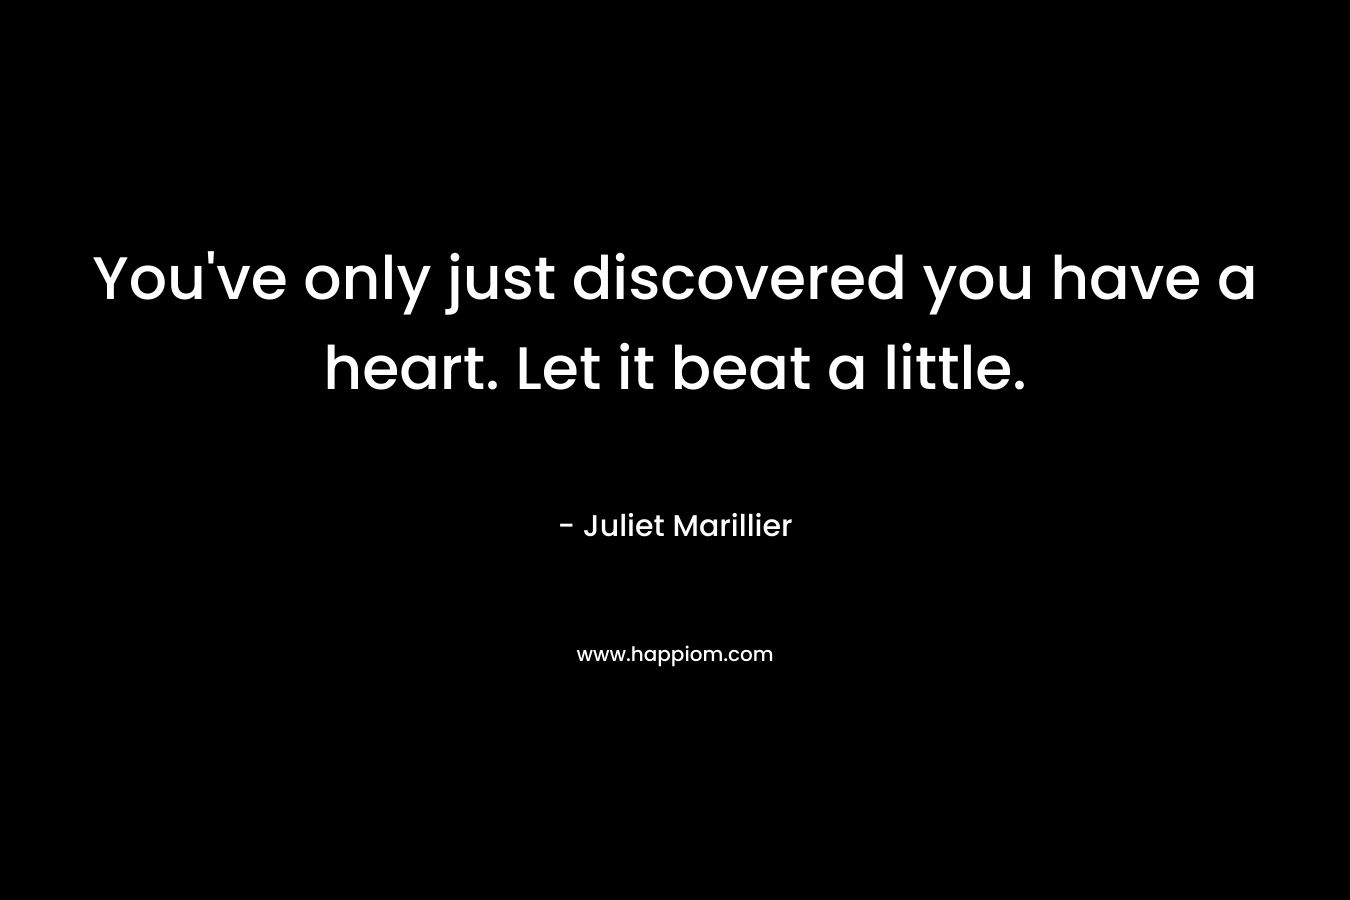 You've only just discovered you have a heart. Let it beat a little.